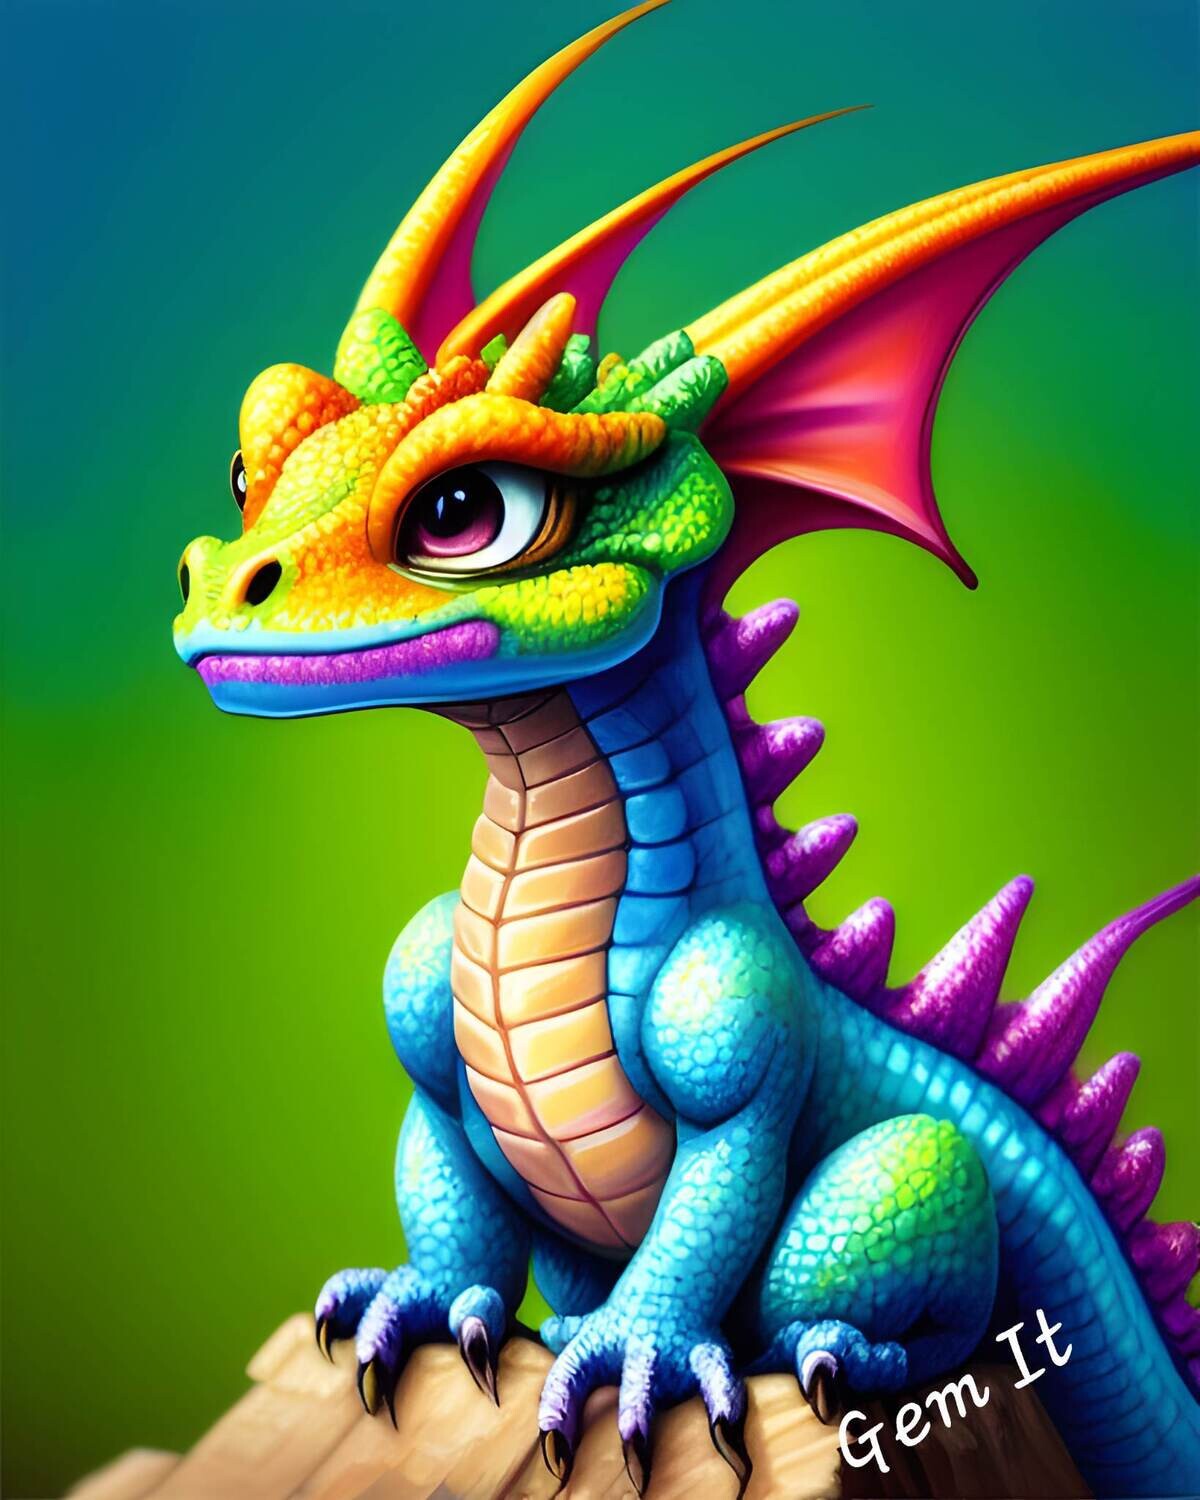 Baby Dragon 815 - Specially ordered for you. Delivery is approximately 4 - 6 weeks.